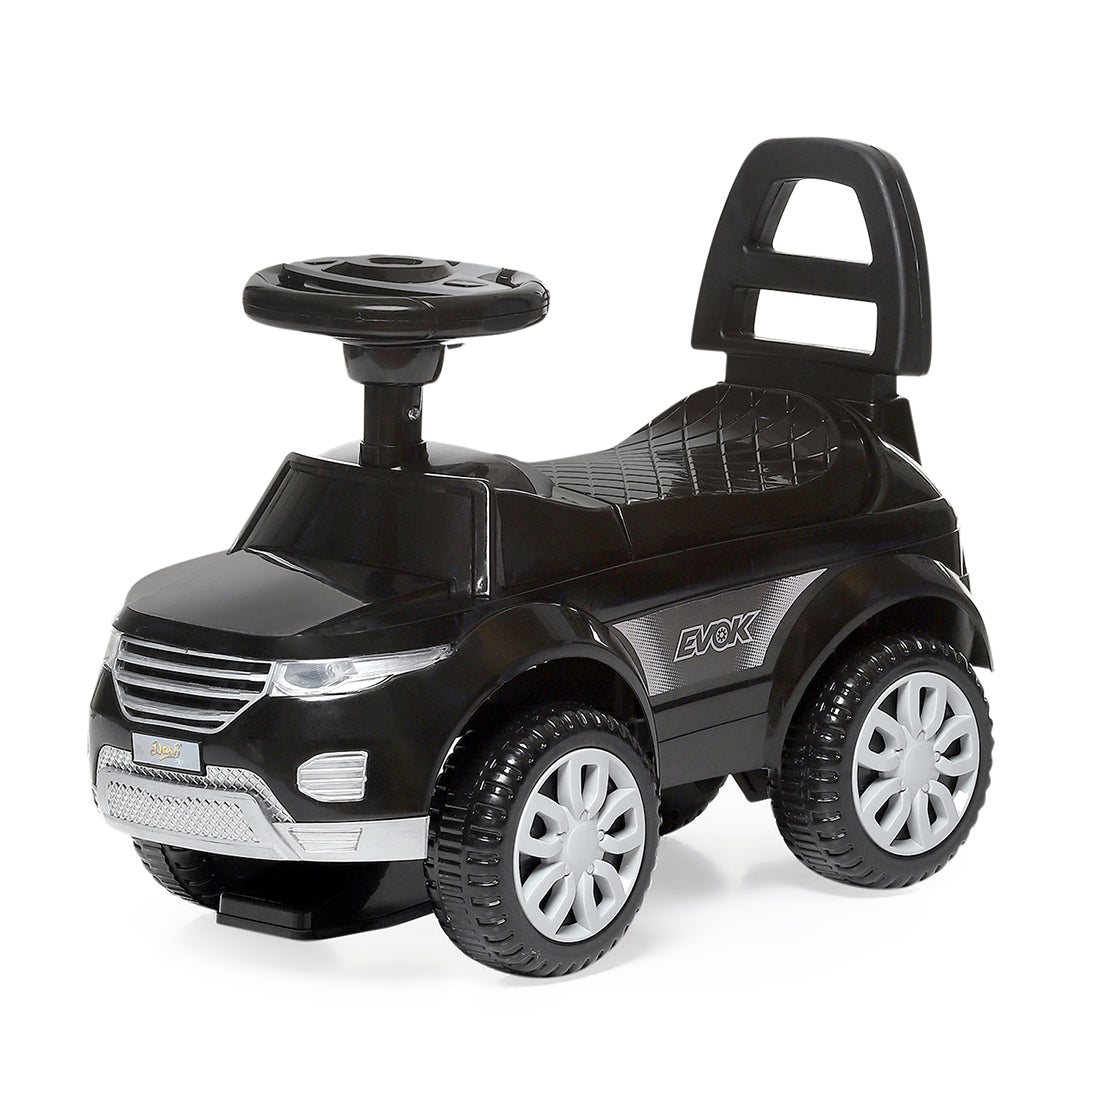 Dash Evok Manual Ride on Car for Kids Age 1 to 3 Years (In Different Colors)